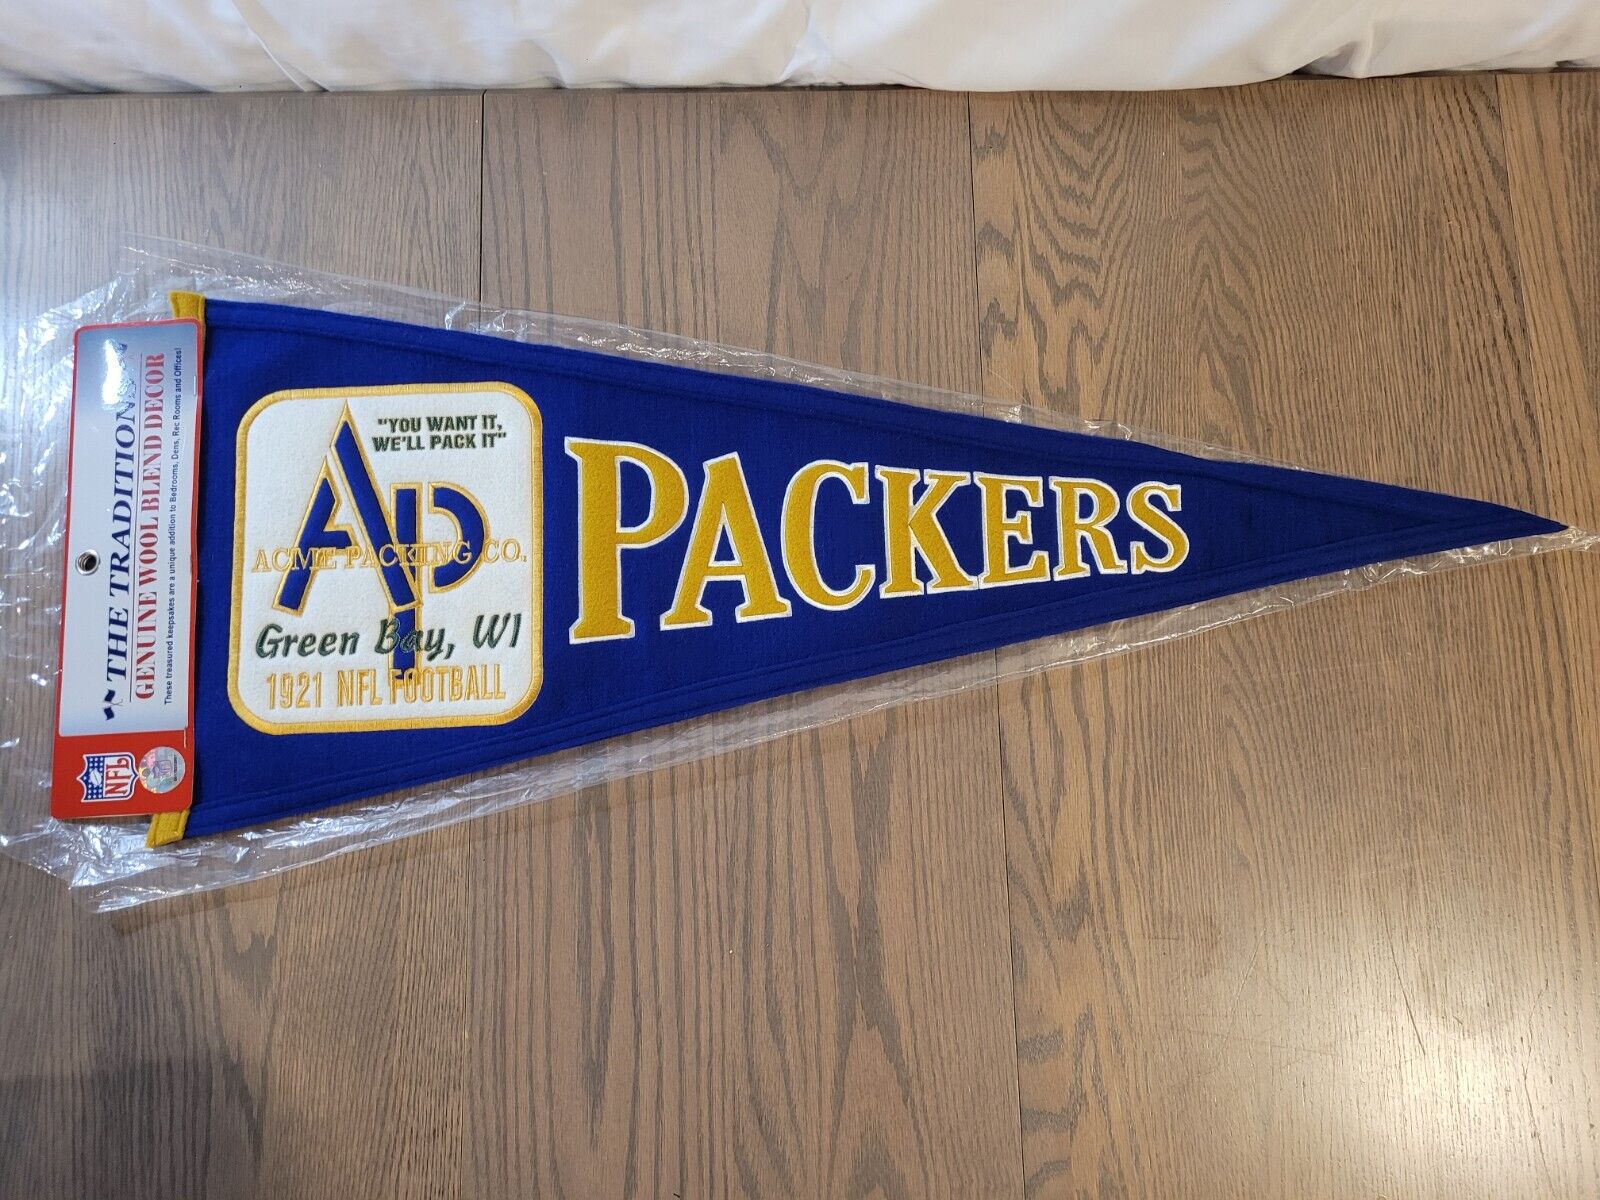 Acme Packing Co 1921 NFL Football Green Bay WI Packers Traditions Pennant NEW